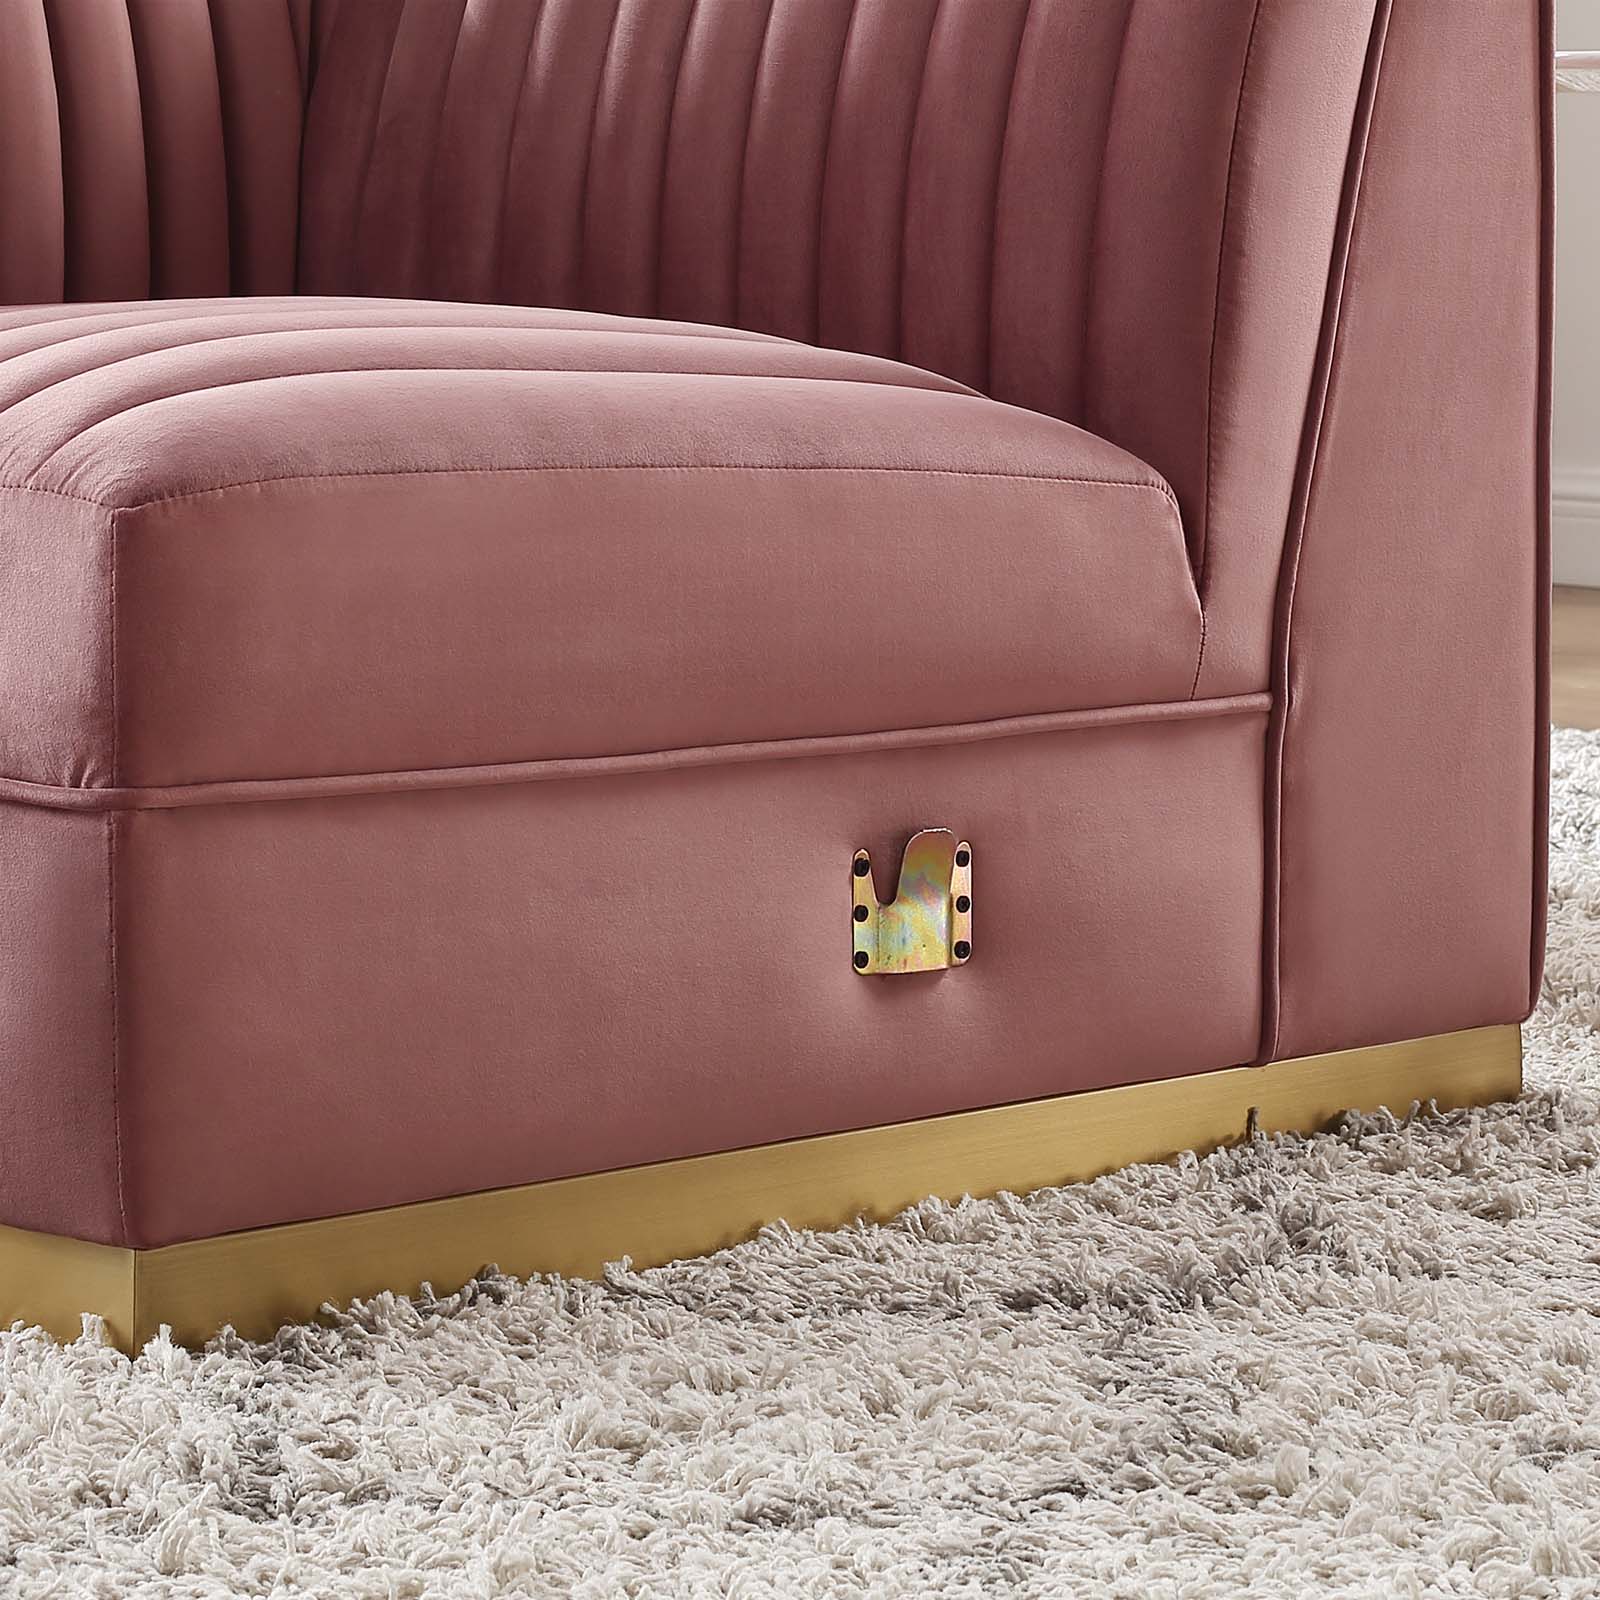 Modway Accent Chairs - Sanguine Channel Tufted Performance Velvet Modular Sectional Sofa Left Corner Chair Dusty Rose